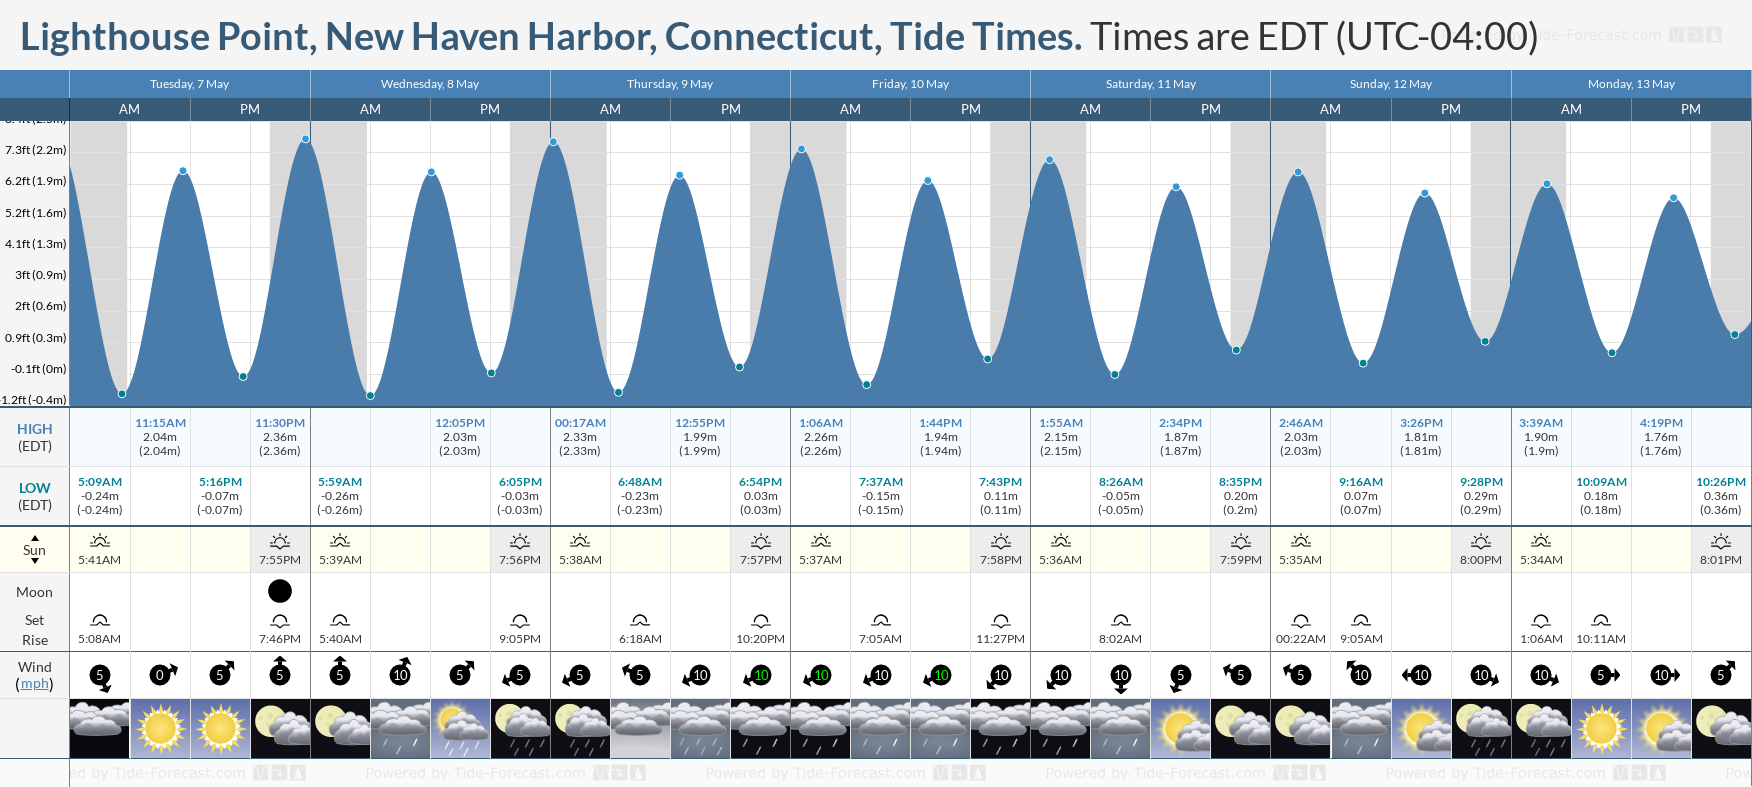 Lighthouse Point, New Haven Harbor, Connecticut Tide Chart including high and low tide times for the next 7 days